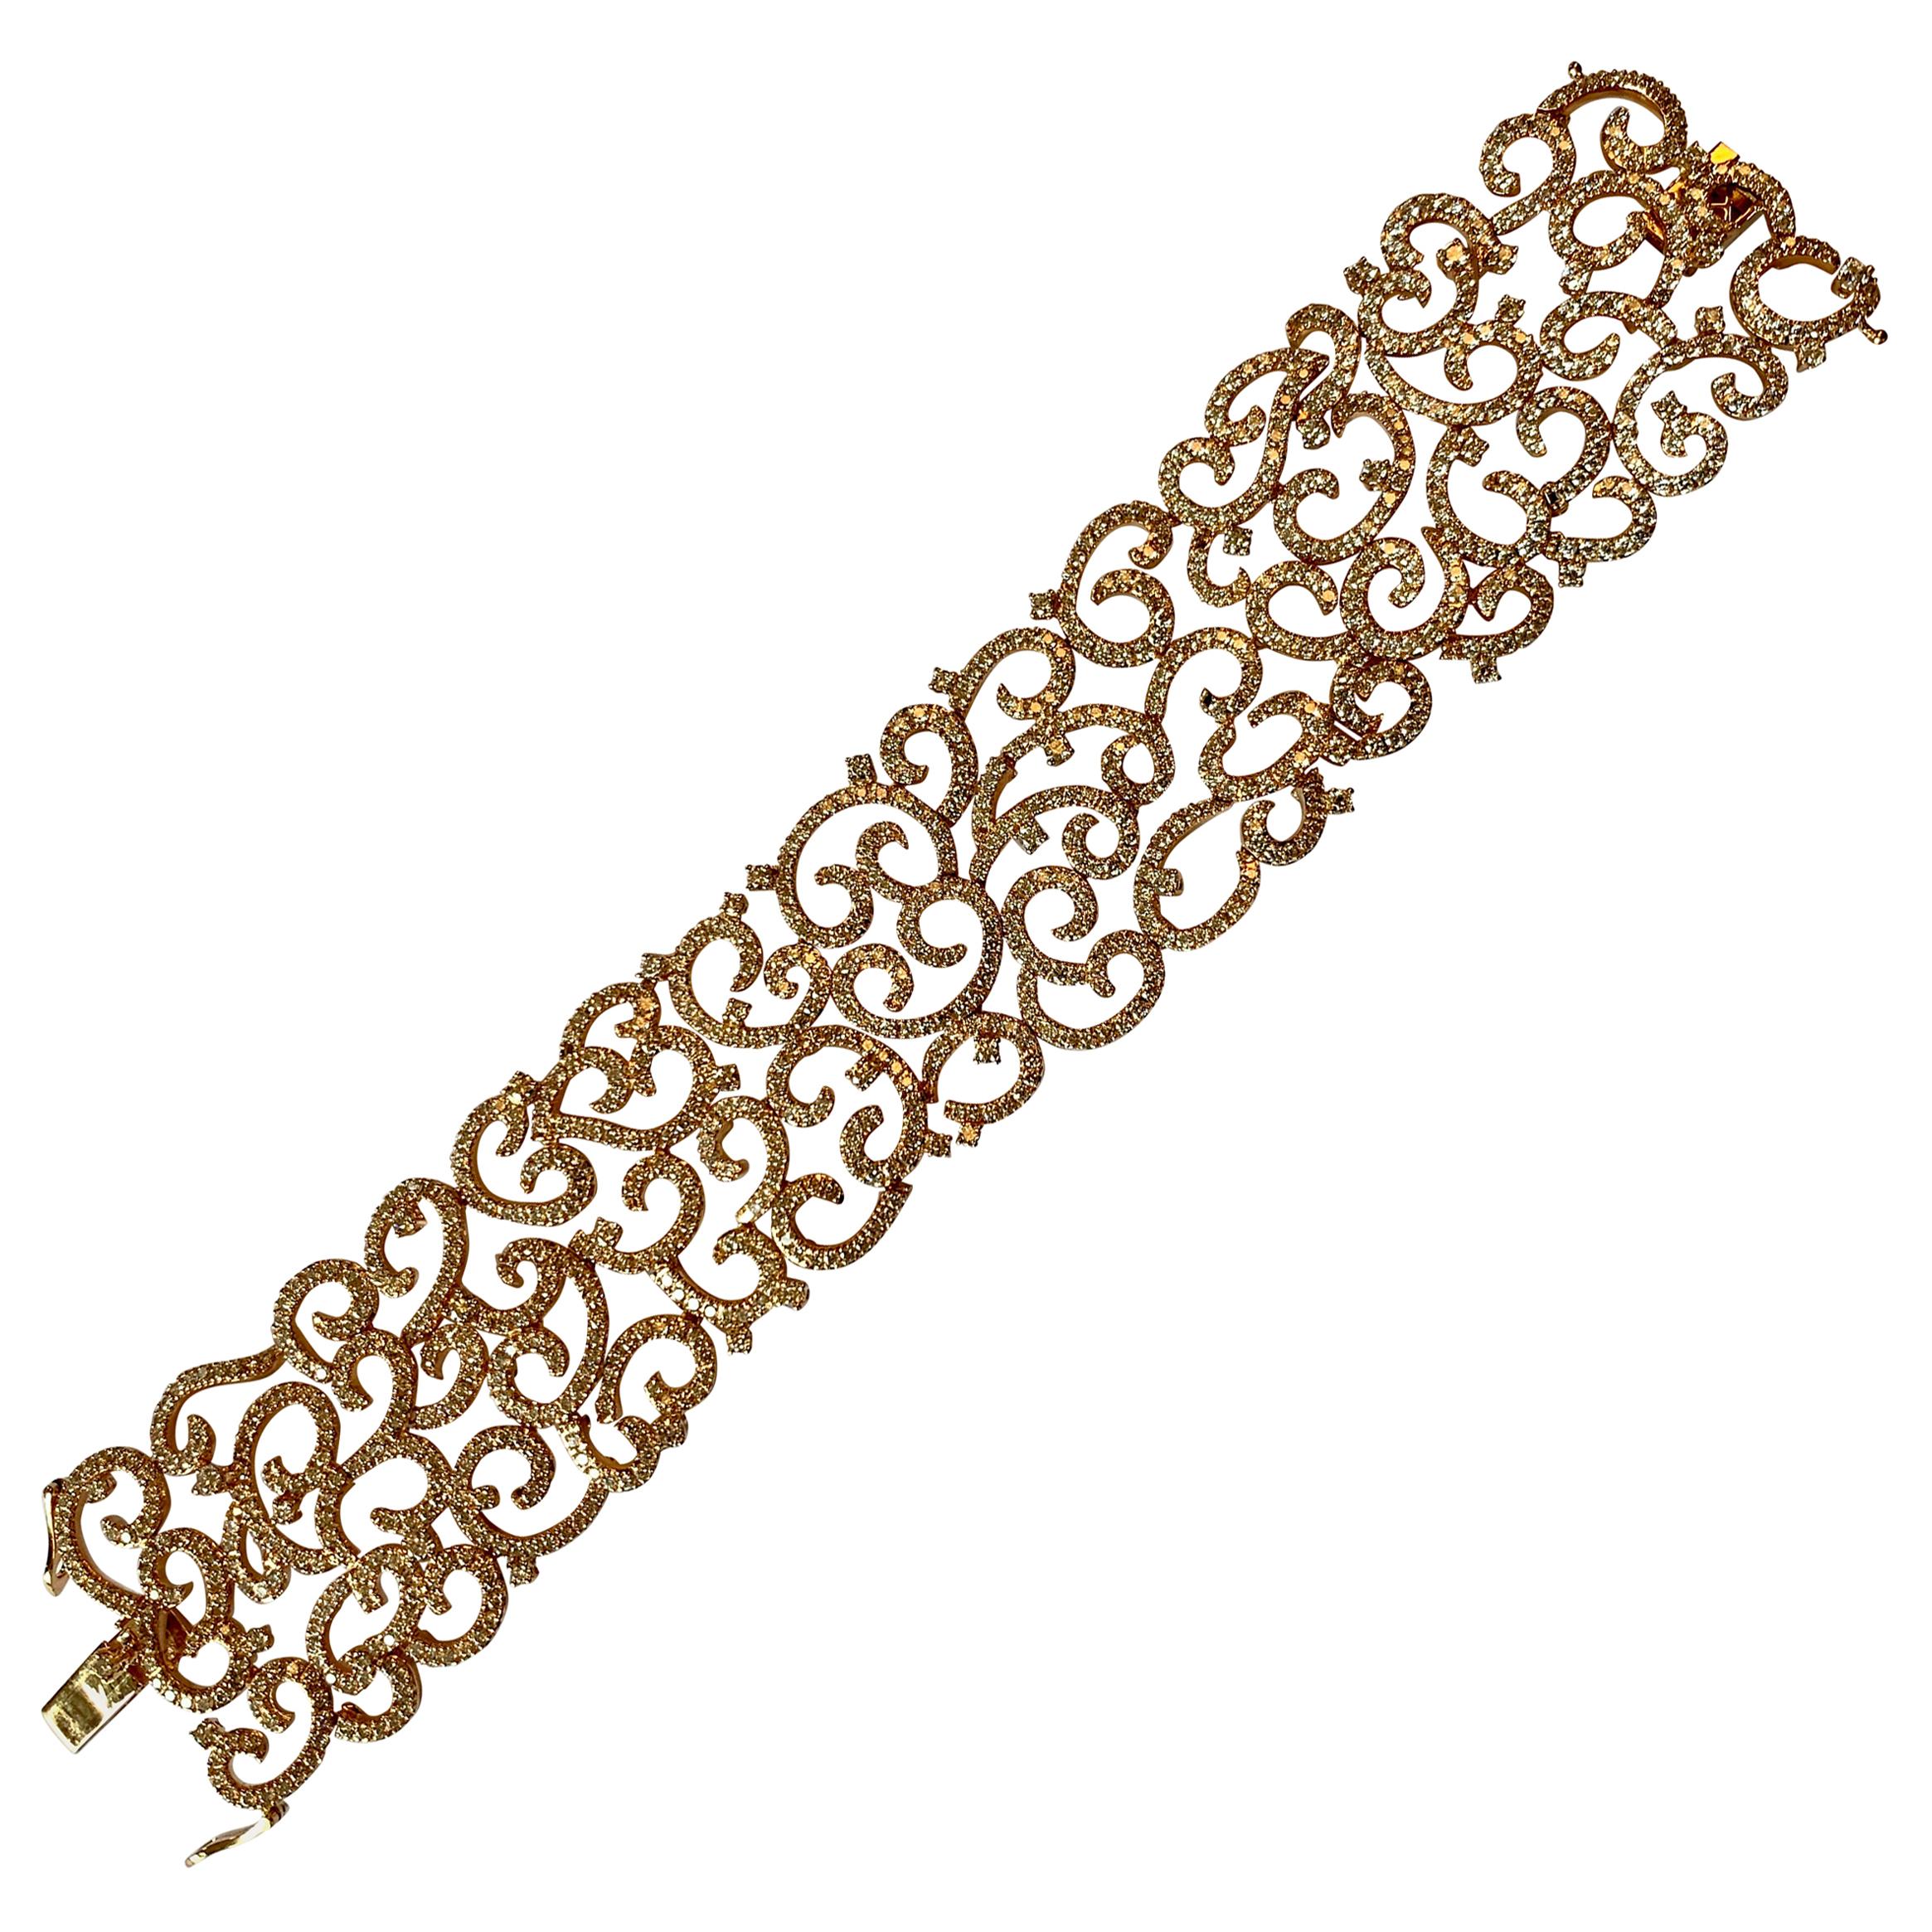 Intricate and Wide 18 Karat Pink Gold Bracelet with Diamonds